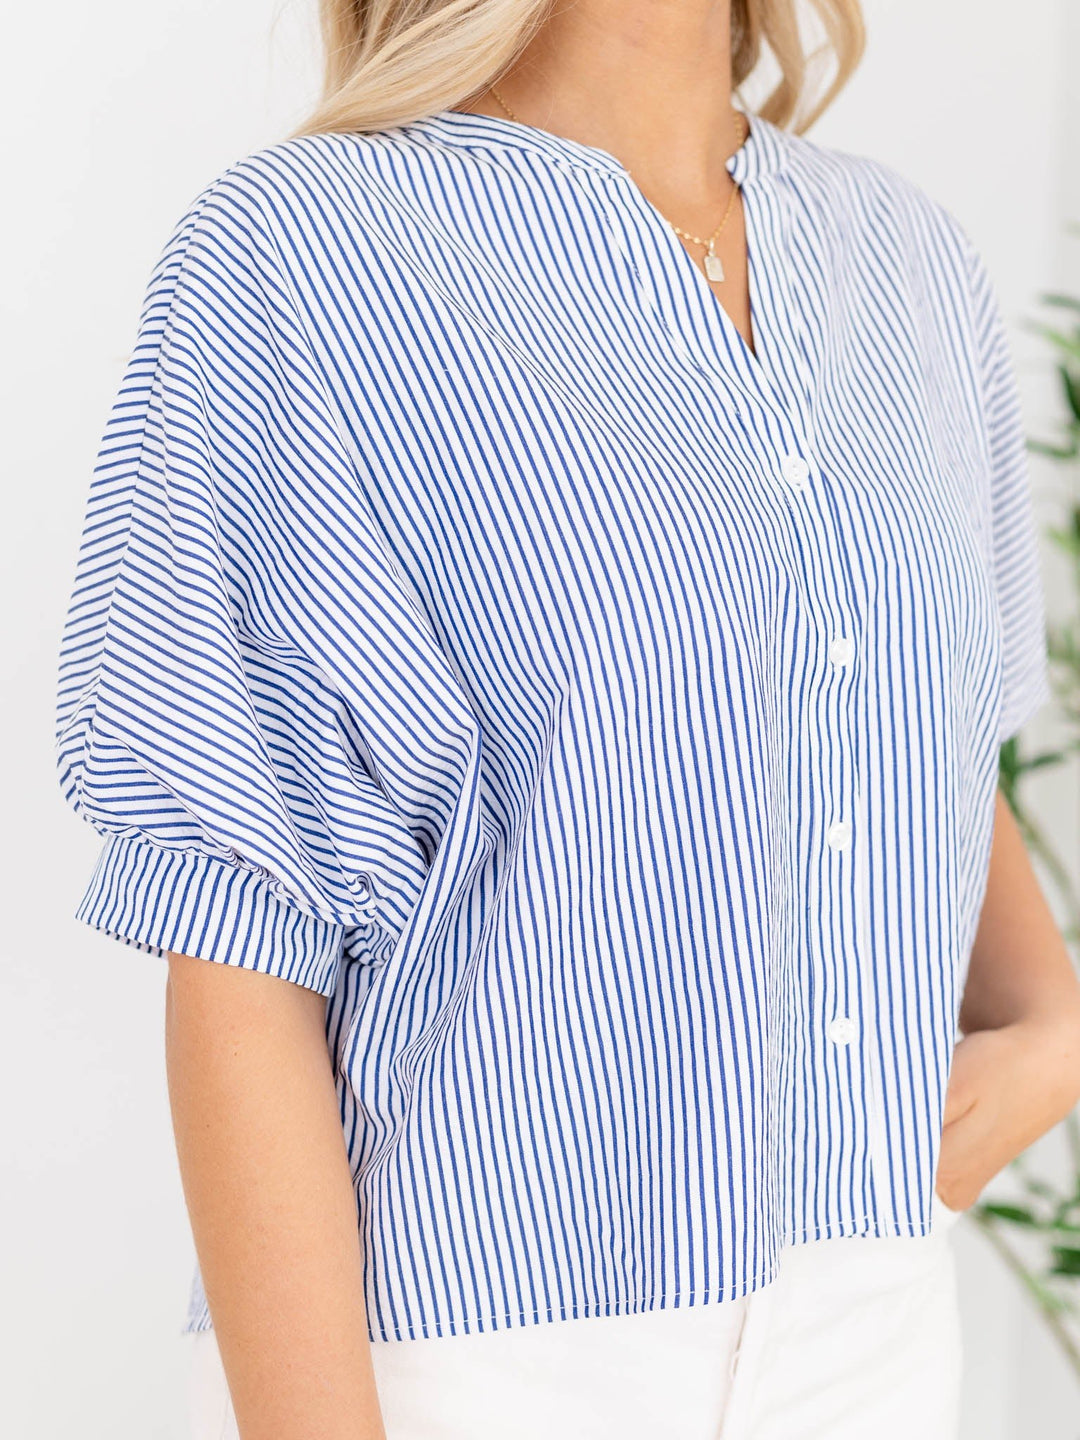 Allie Rose Easy Pinstripe Button Front BlouseWoven tops